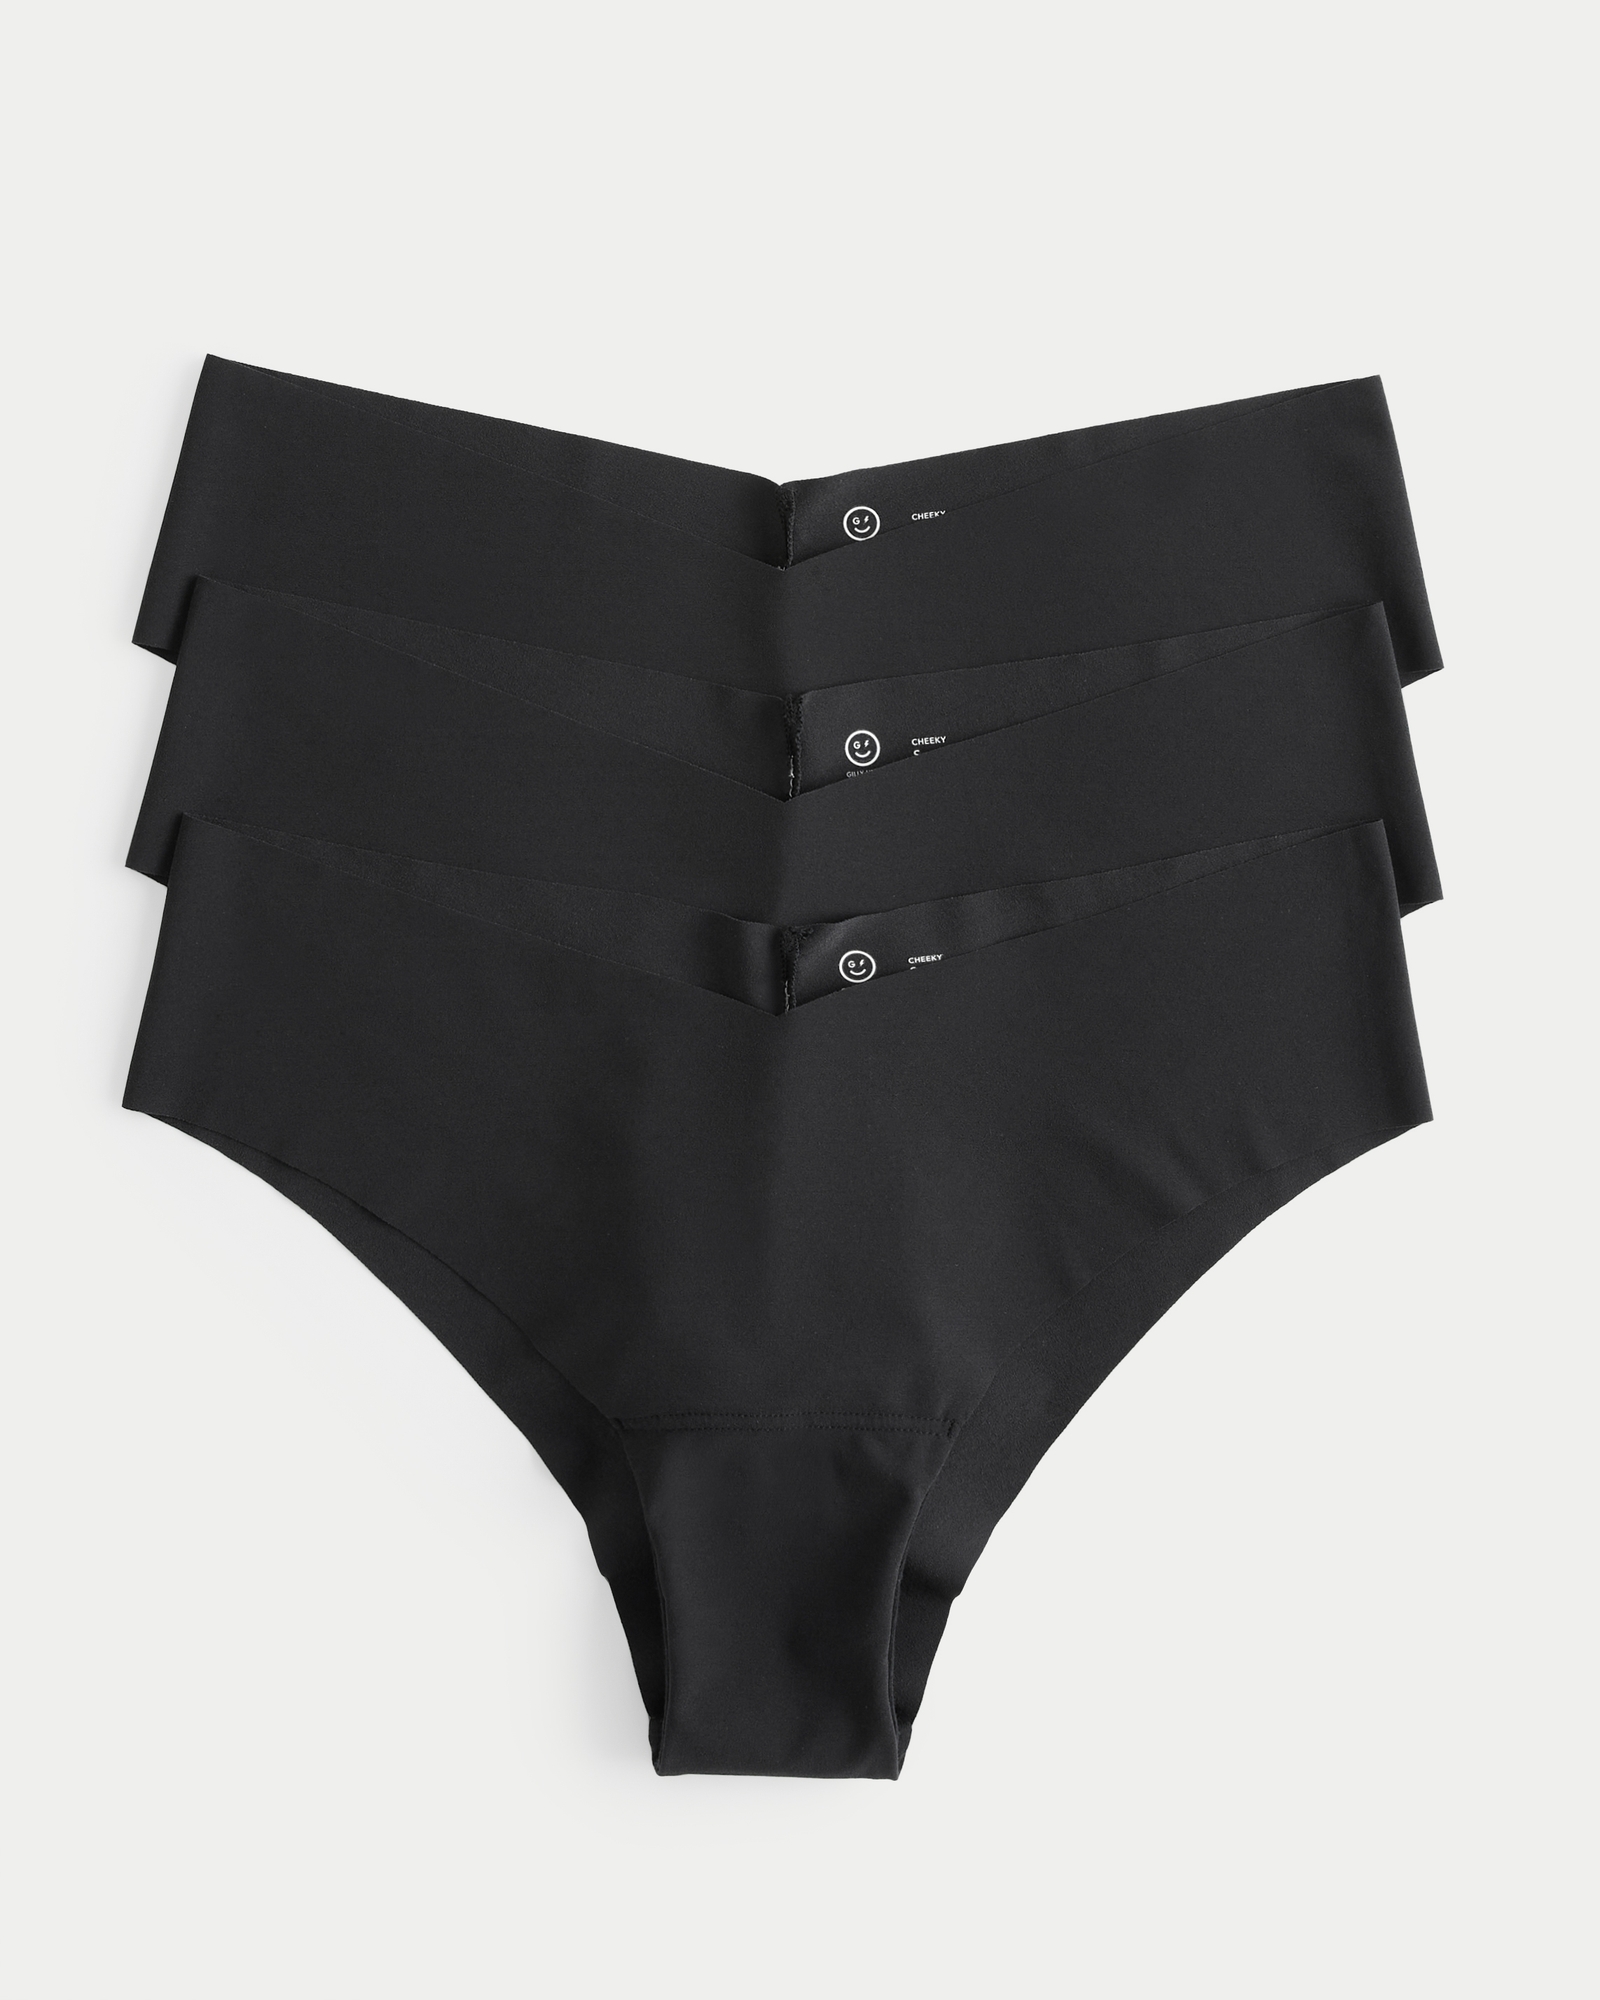 Shop Gilly Hicks Briefs for Women up to 75% Off